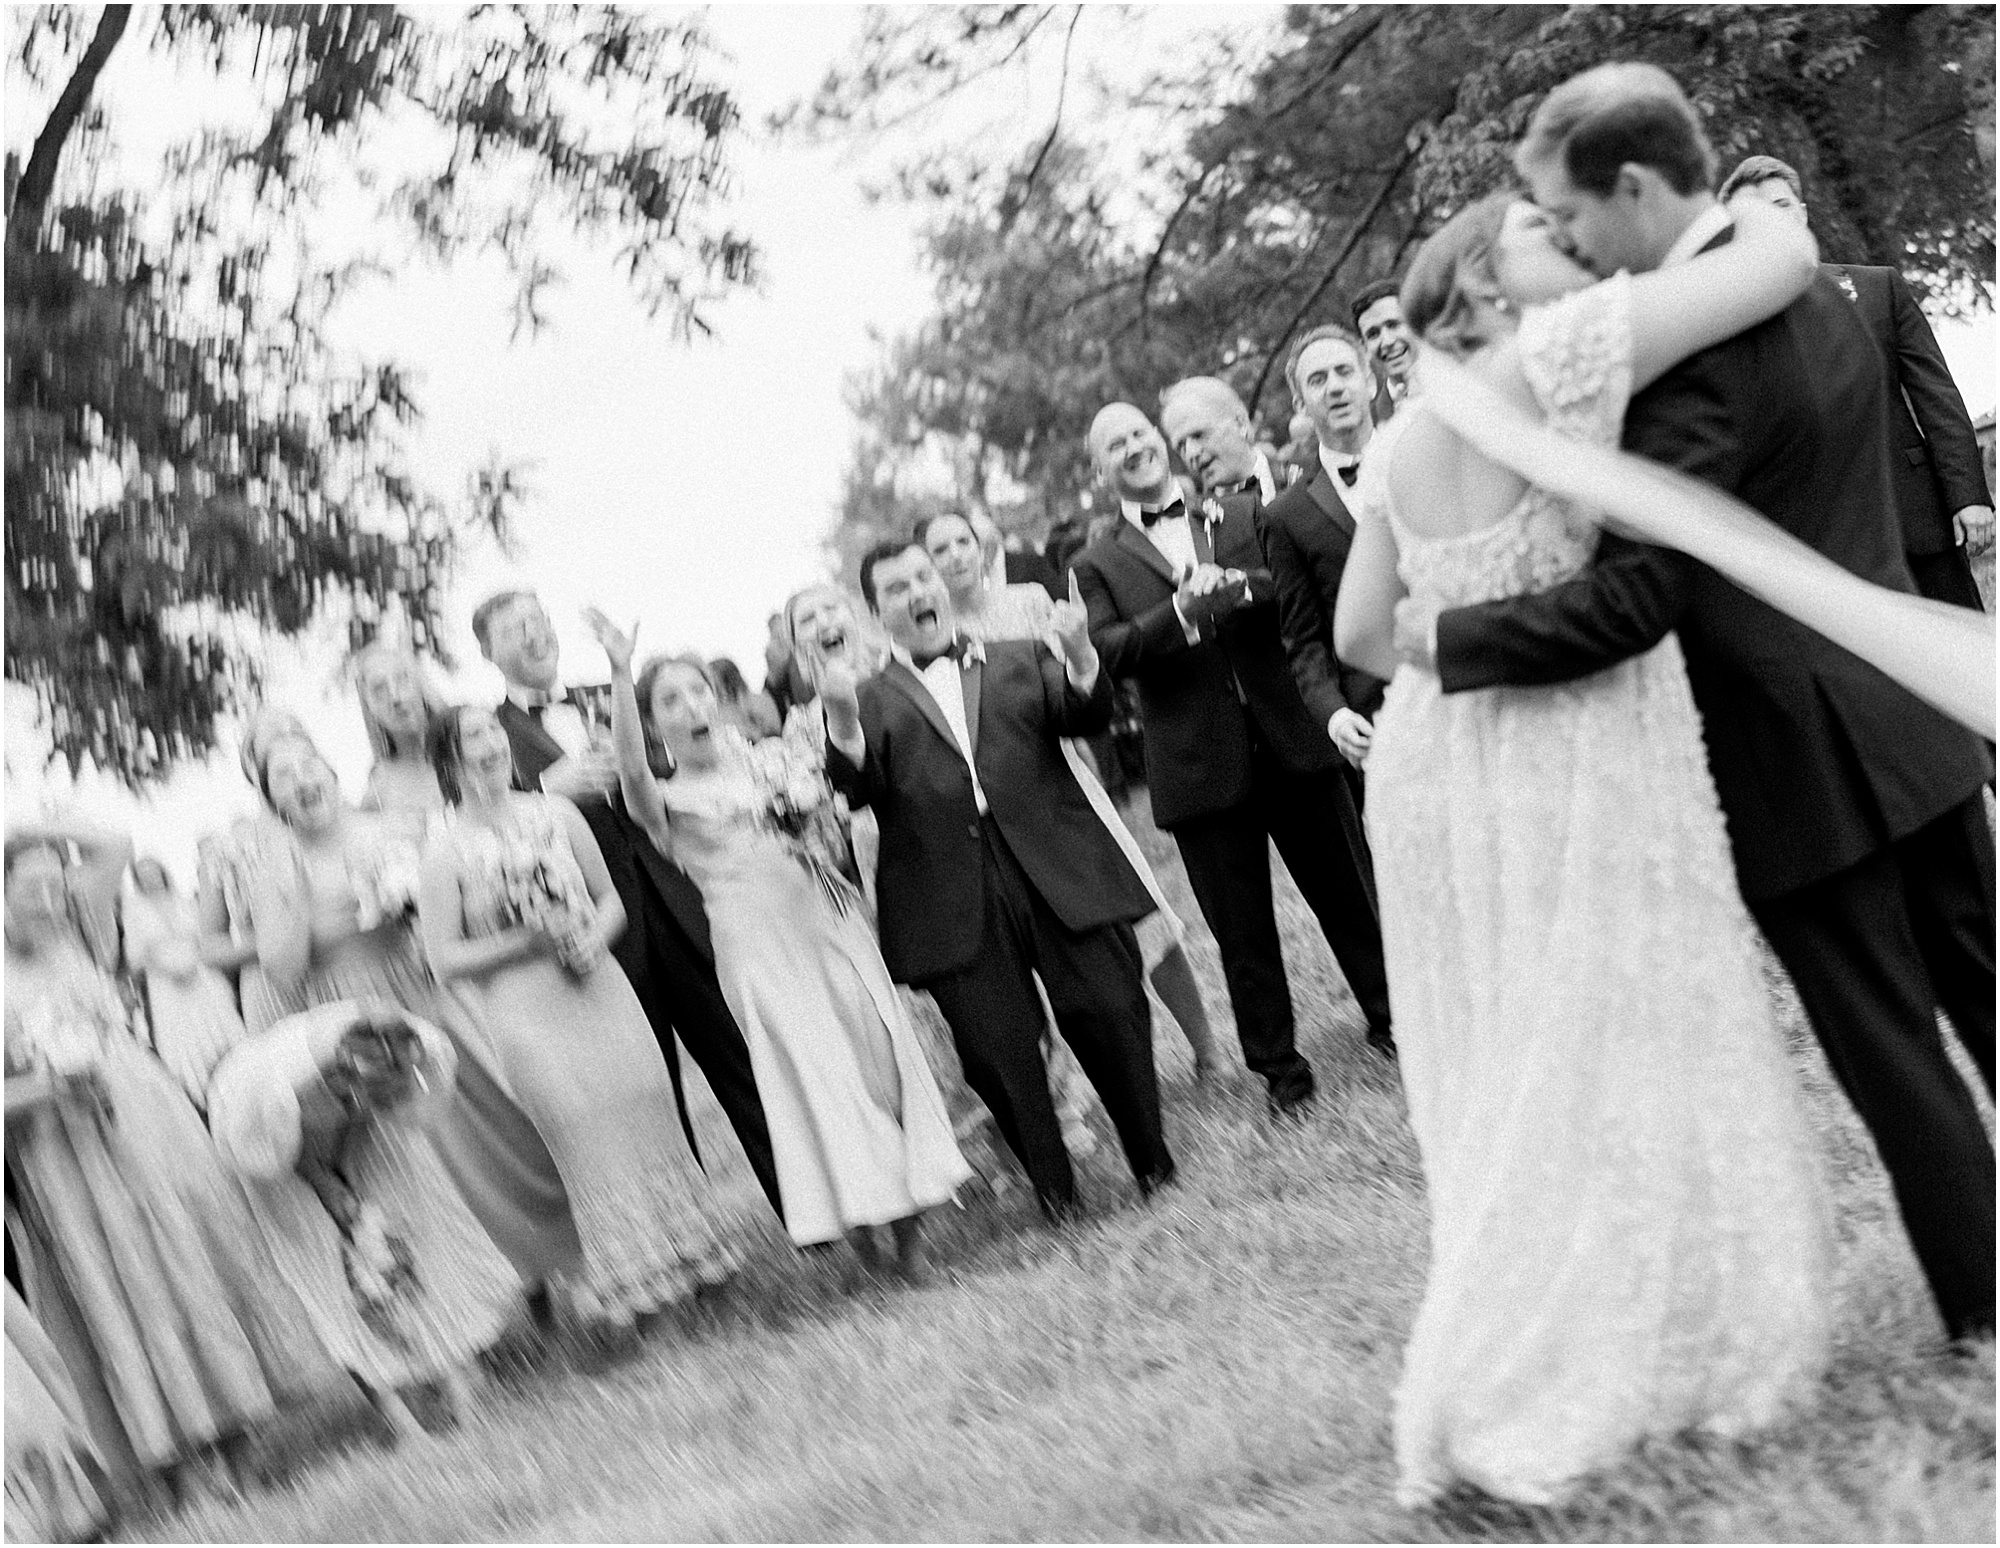 Bride and groom kissing infront of wedding party as everyone cheers. Black and white blurry photo of bride and groom with wedding party.